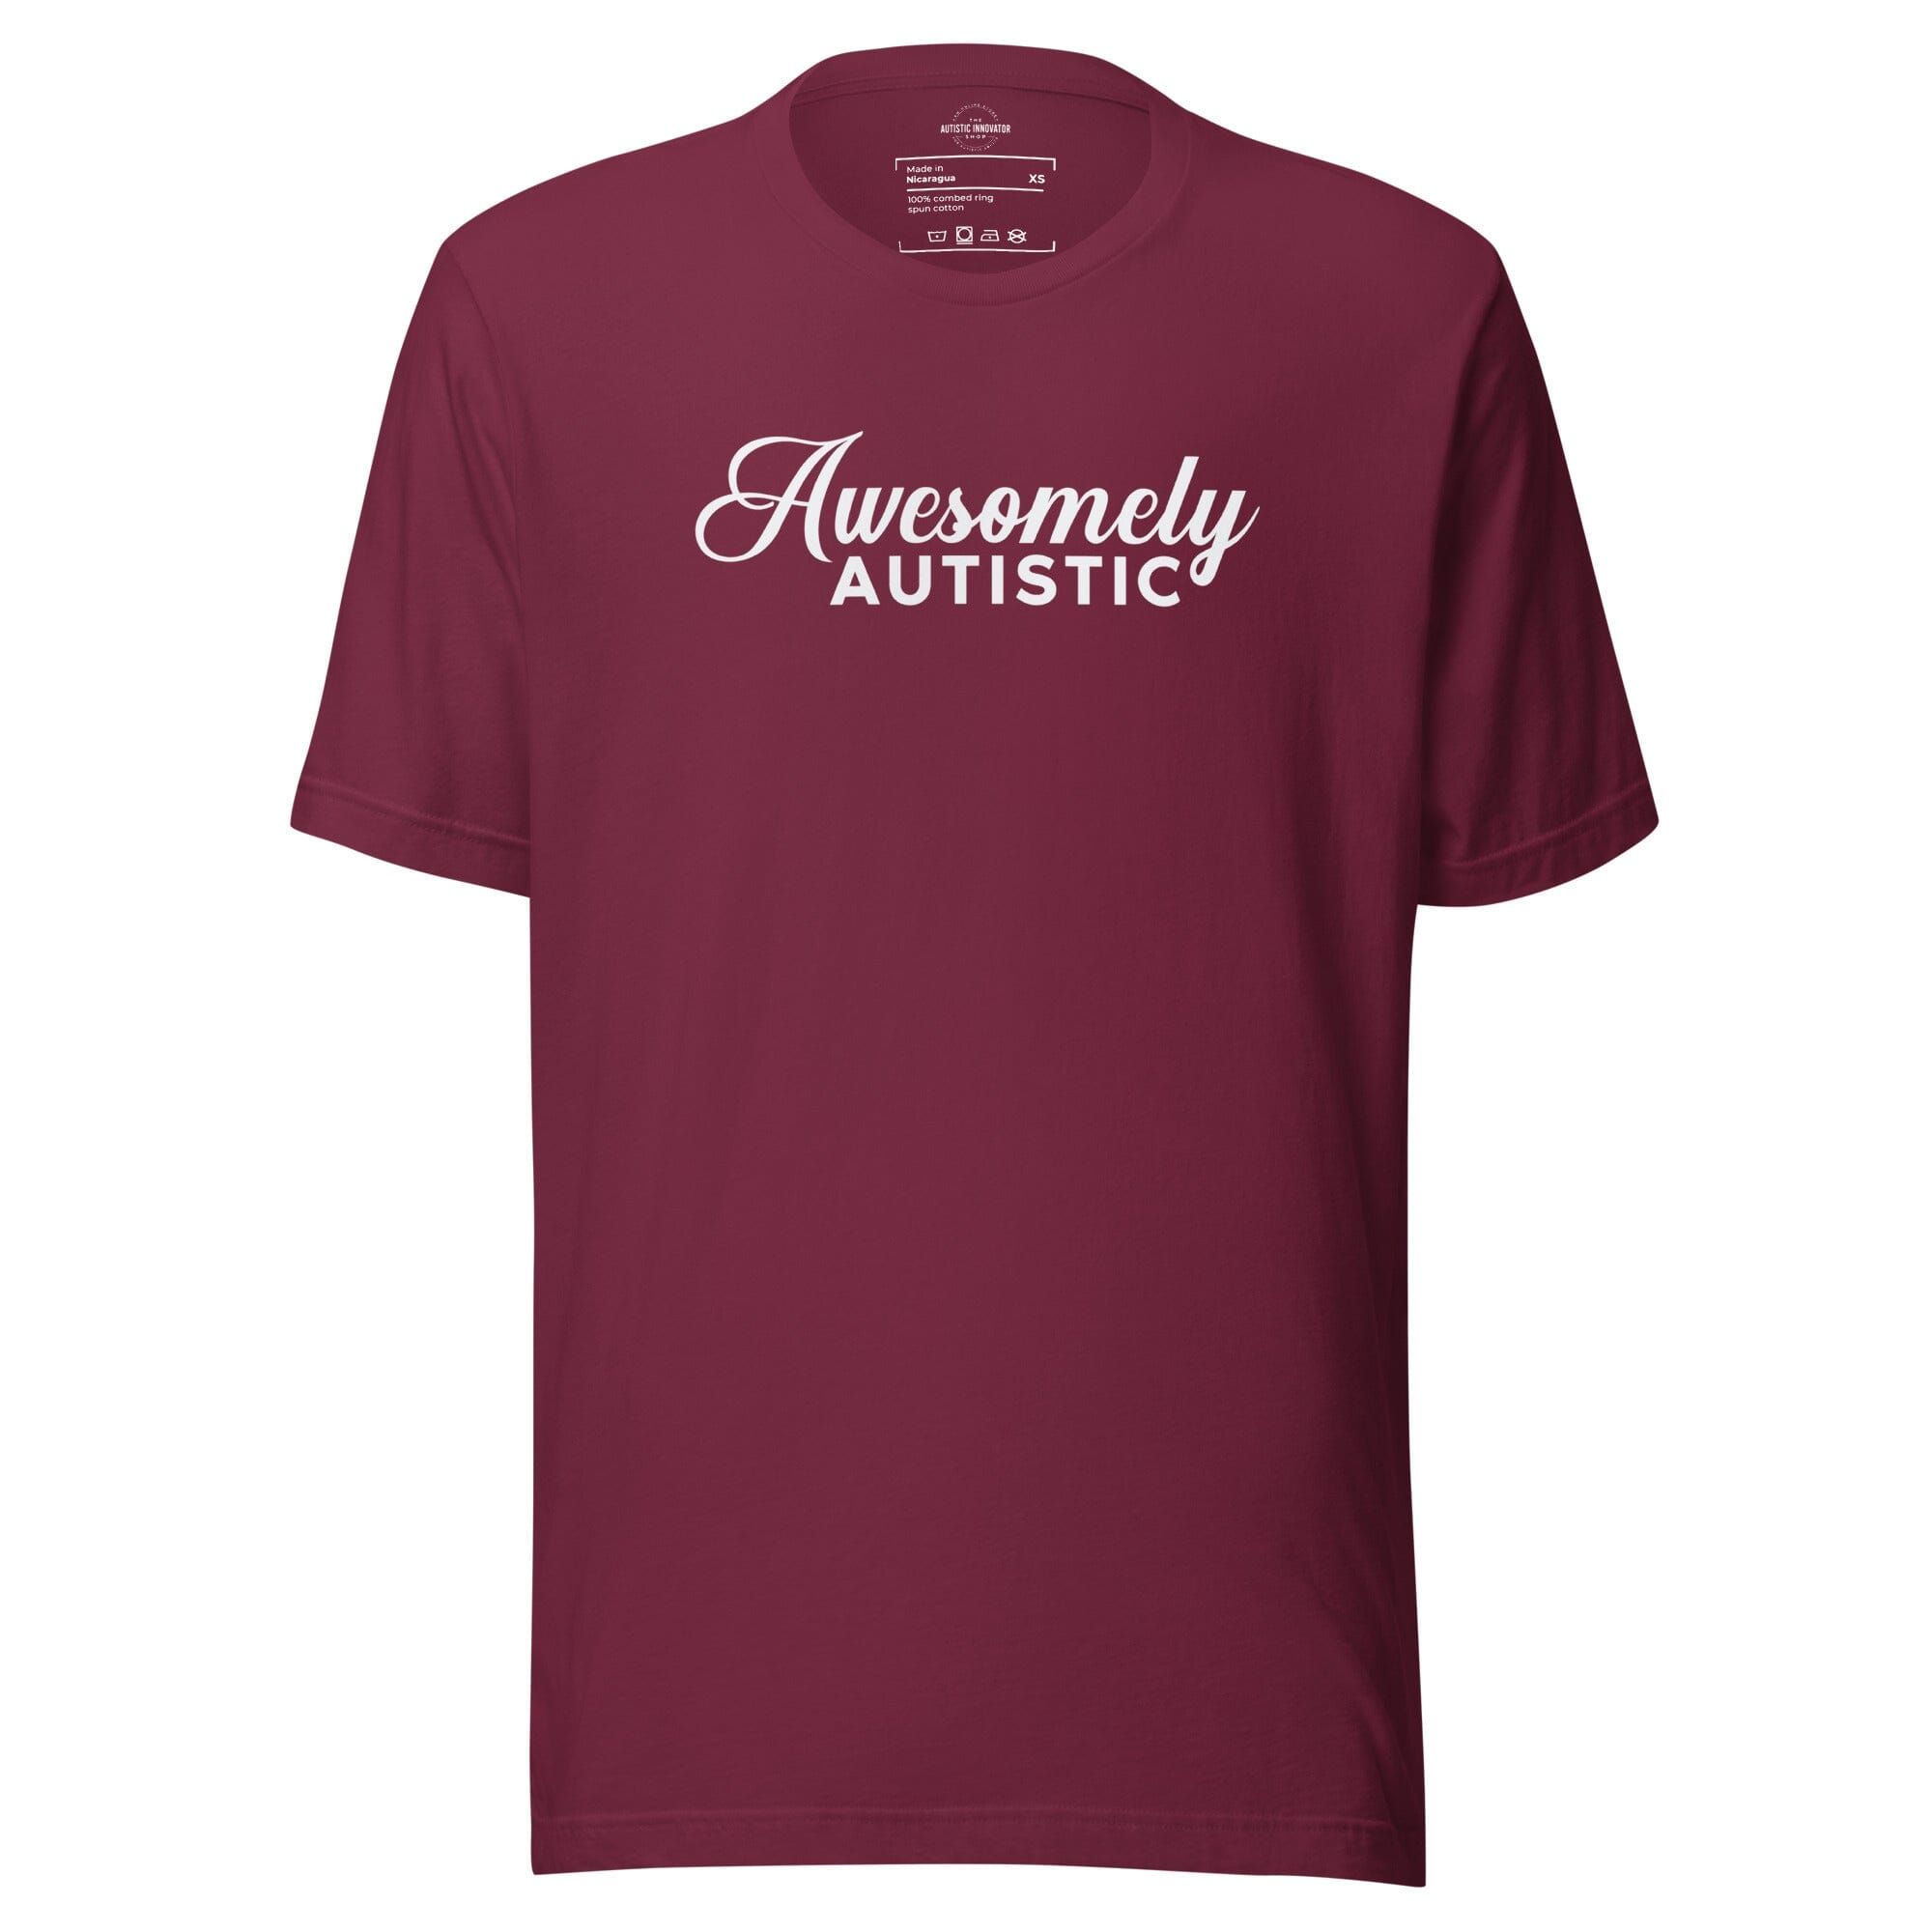 Awesomely Autistic Unisex t-shirt The Autistic Innovator Maroon XS 